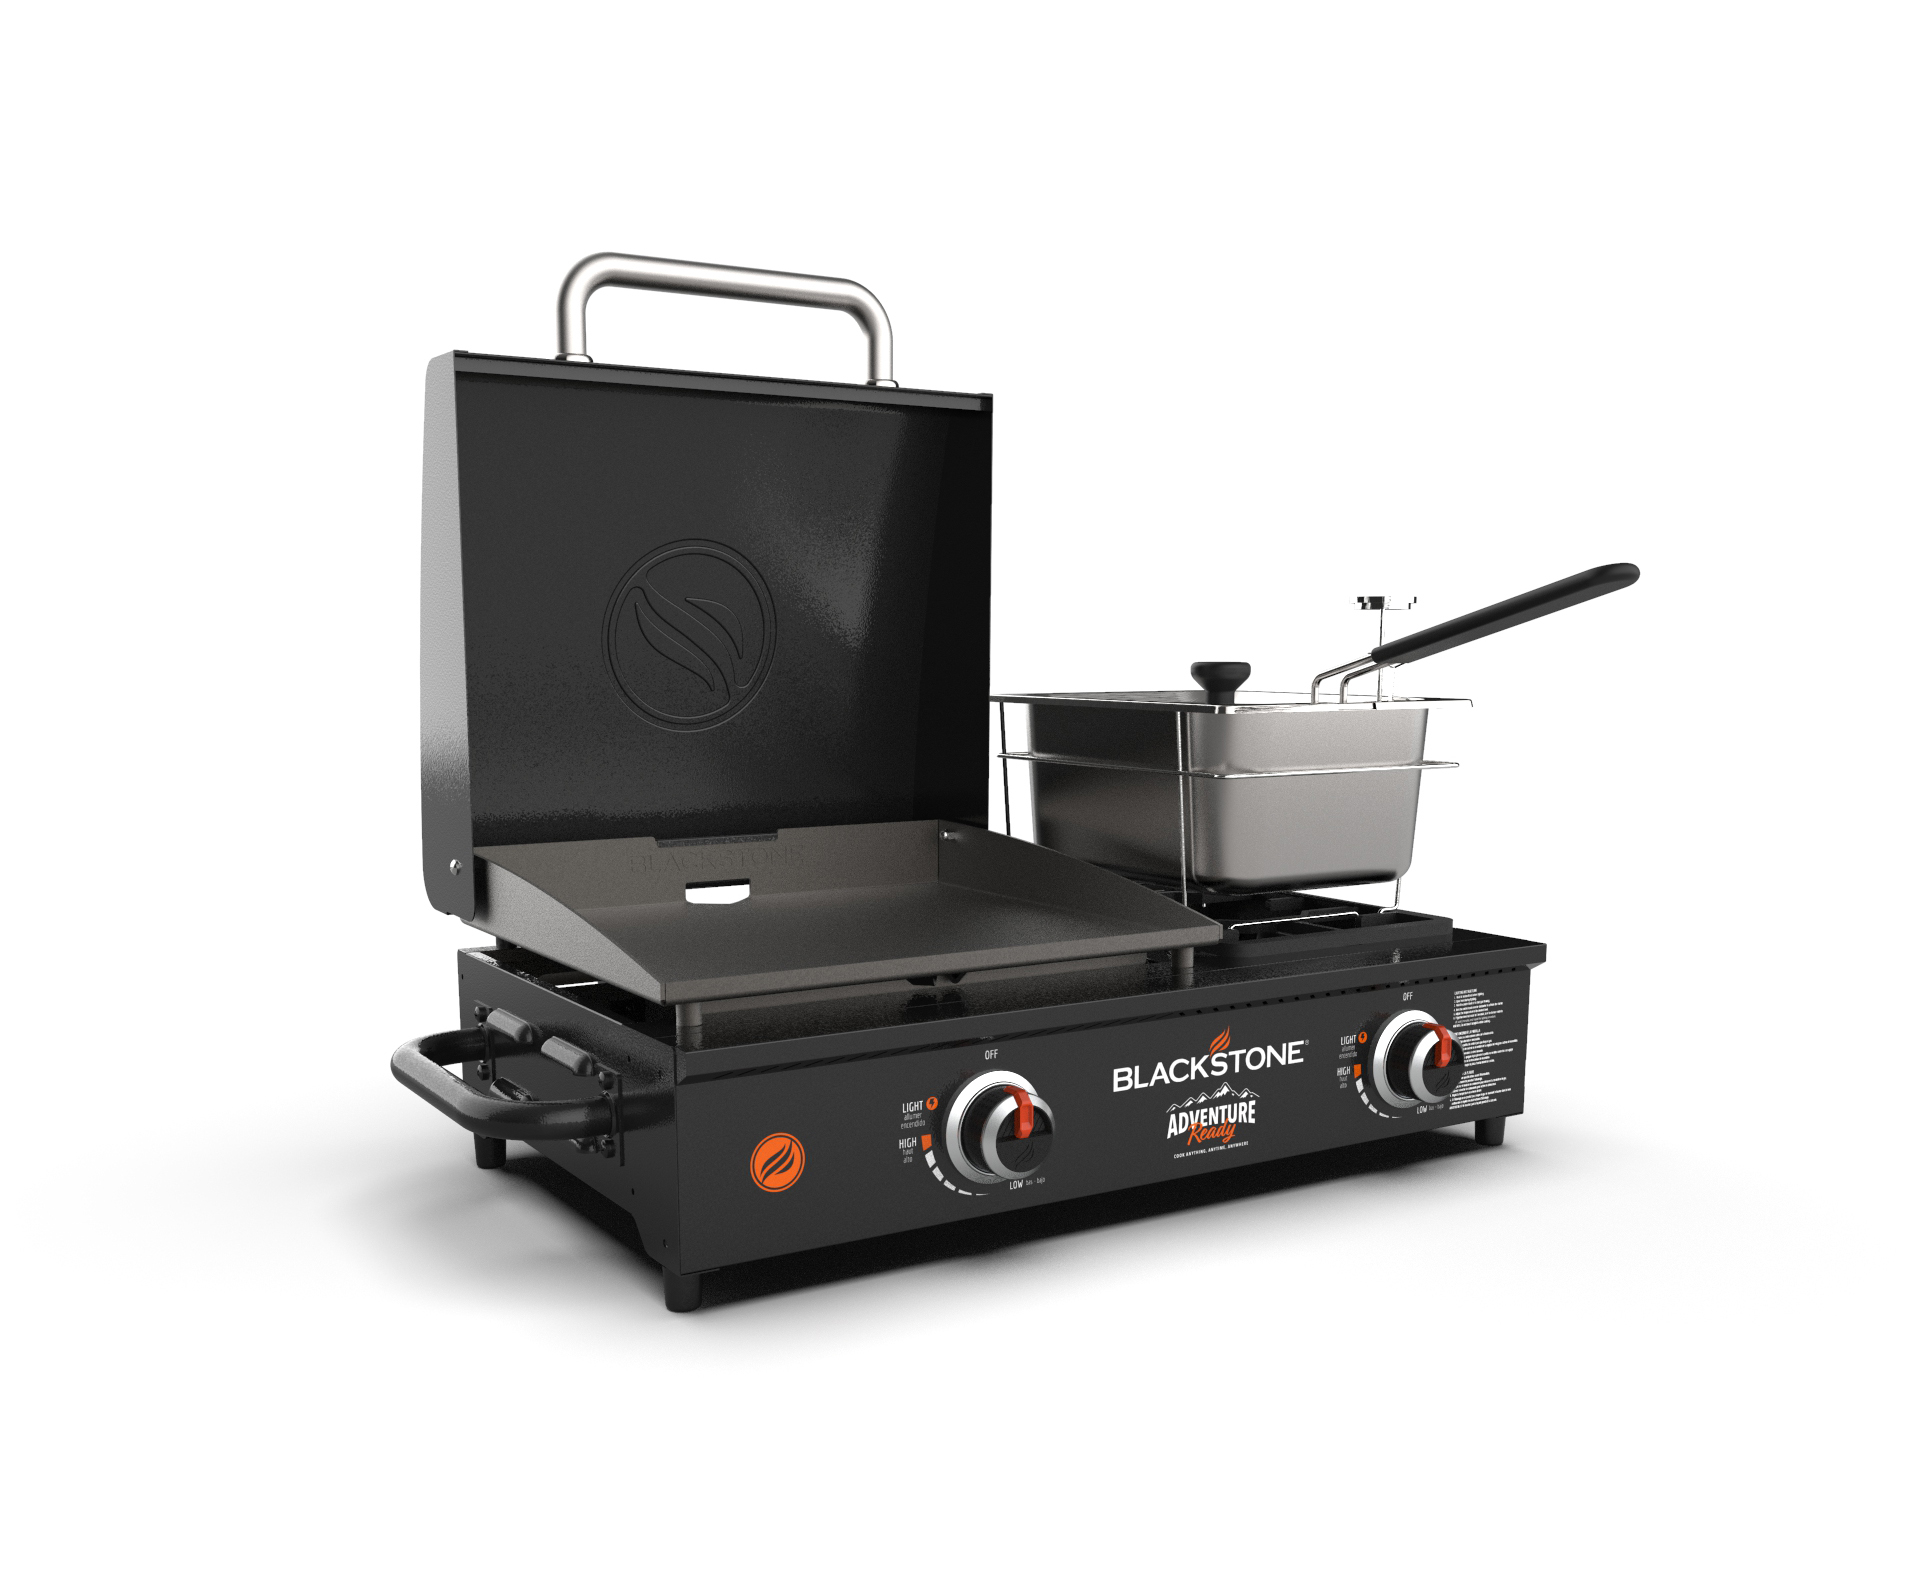 Blackstone Adventure Ready 17" Tabletop Griddle Combo with Fryer - image 5 of 18